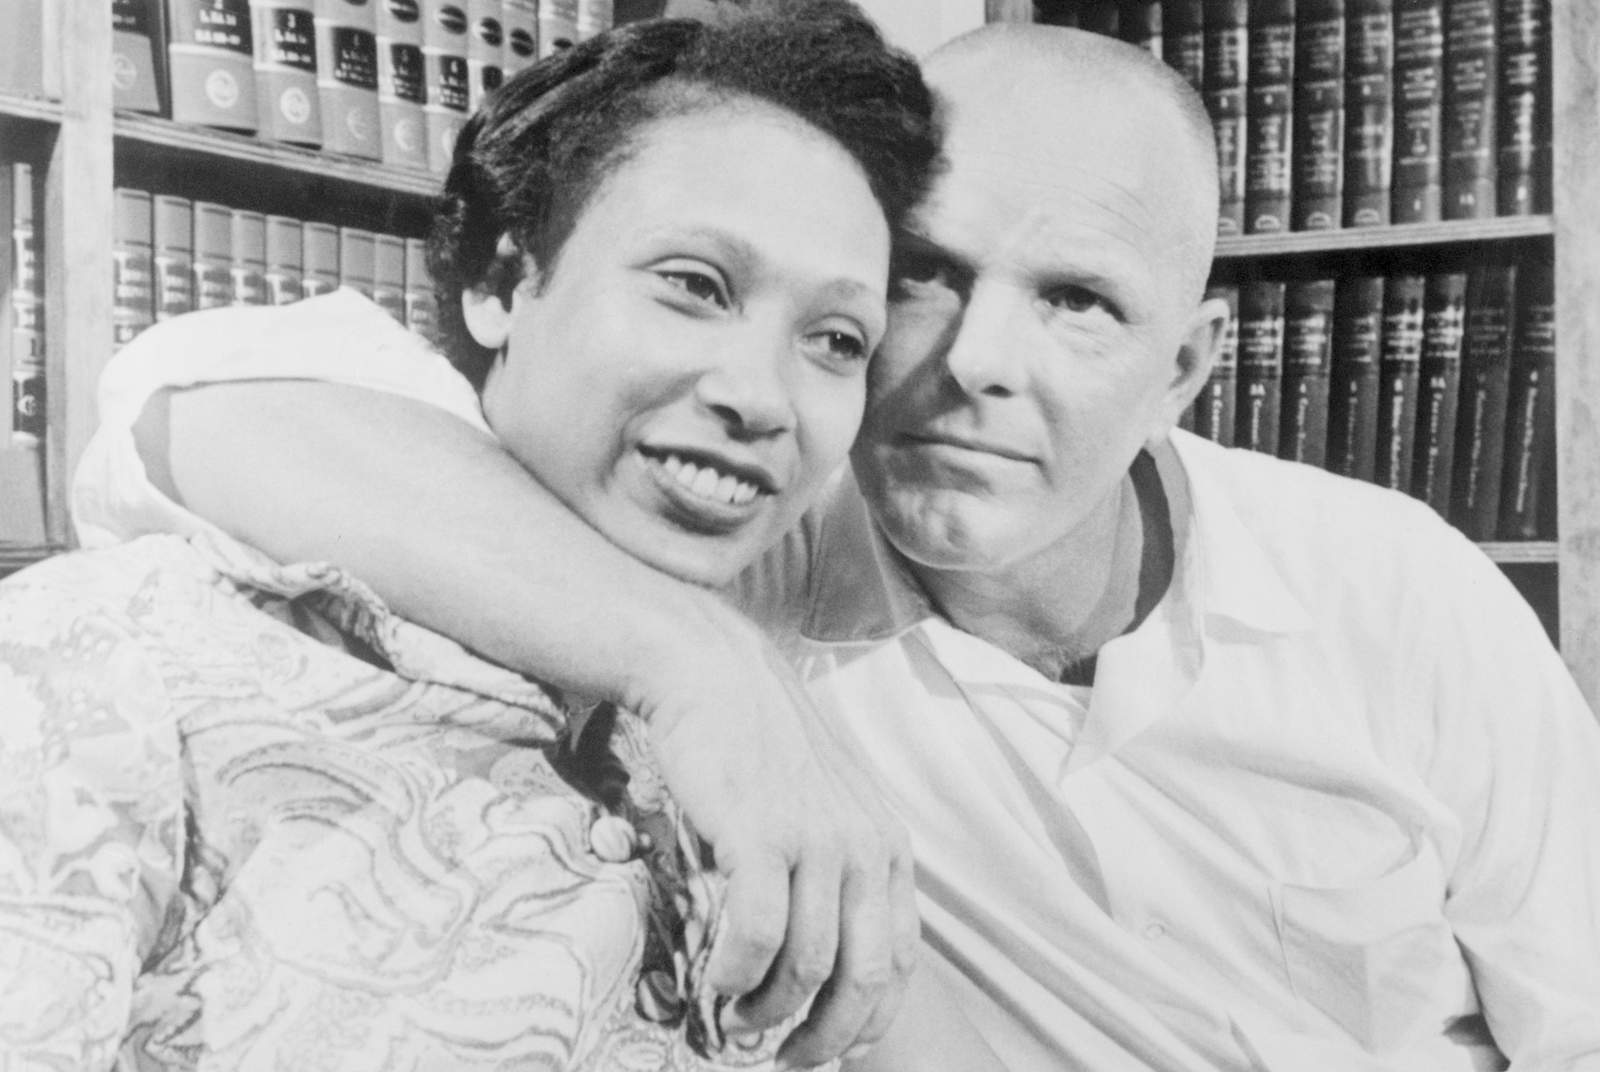 Bernard Cohen, lawyer who took on mixed marriage laws, dies